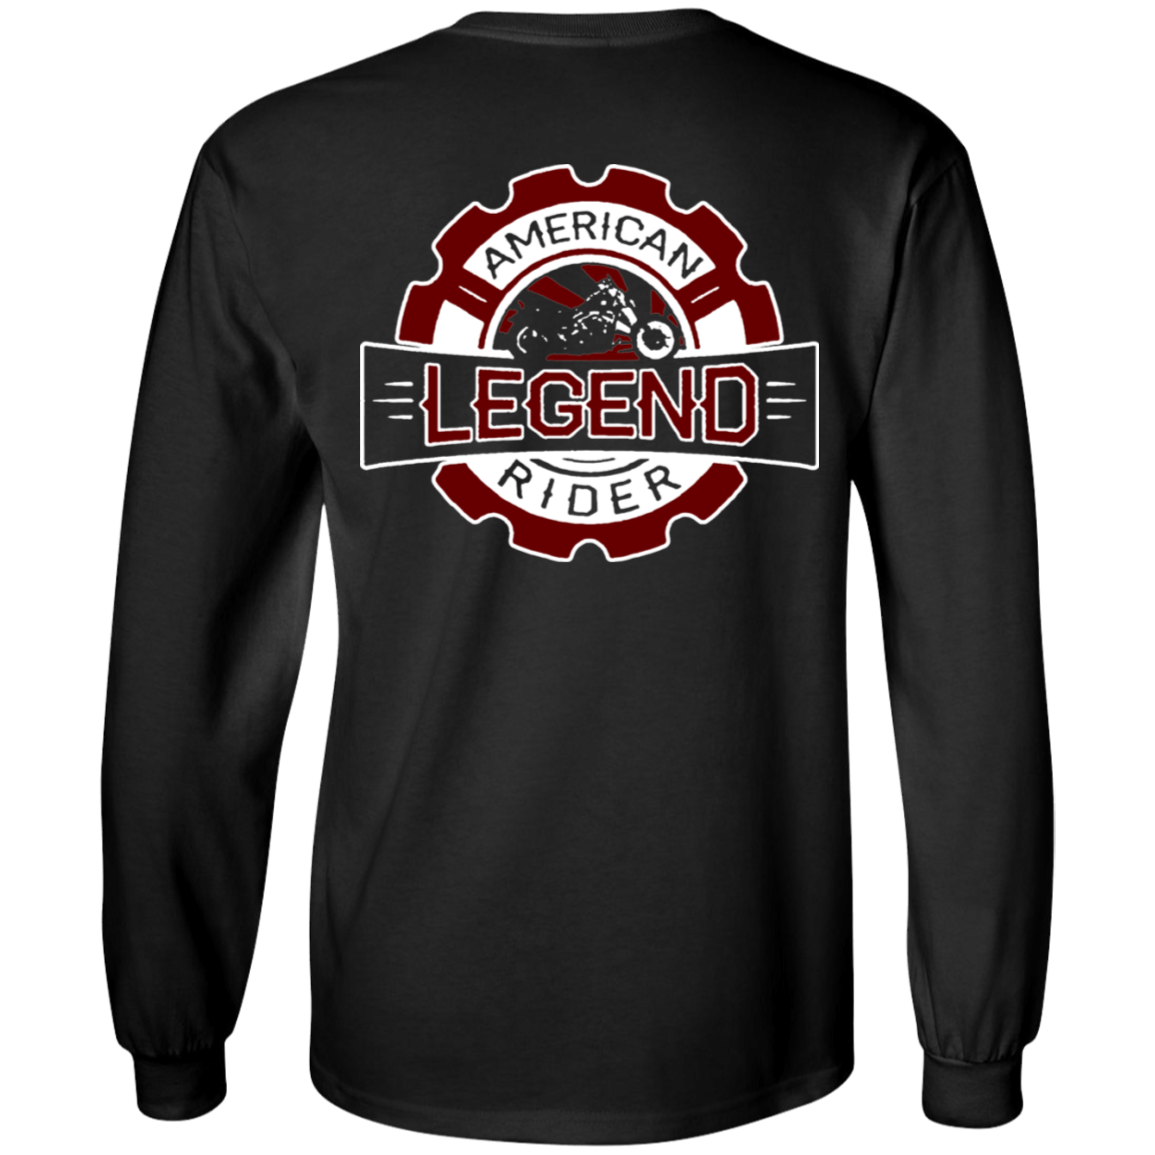 American Legend Rider Official Long Sleeves - American Legend Rider